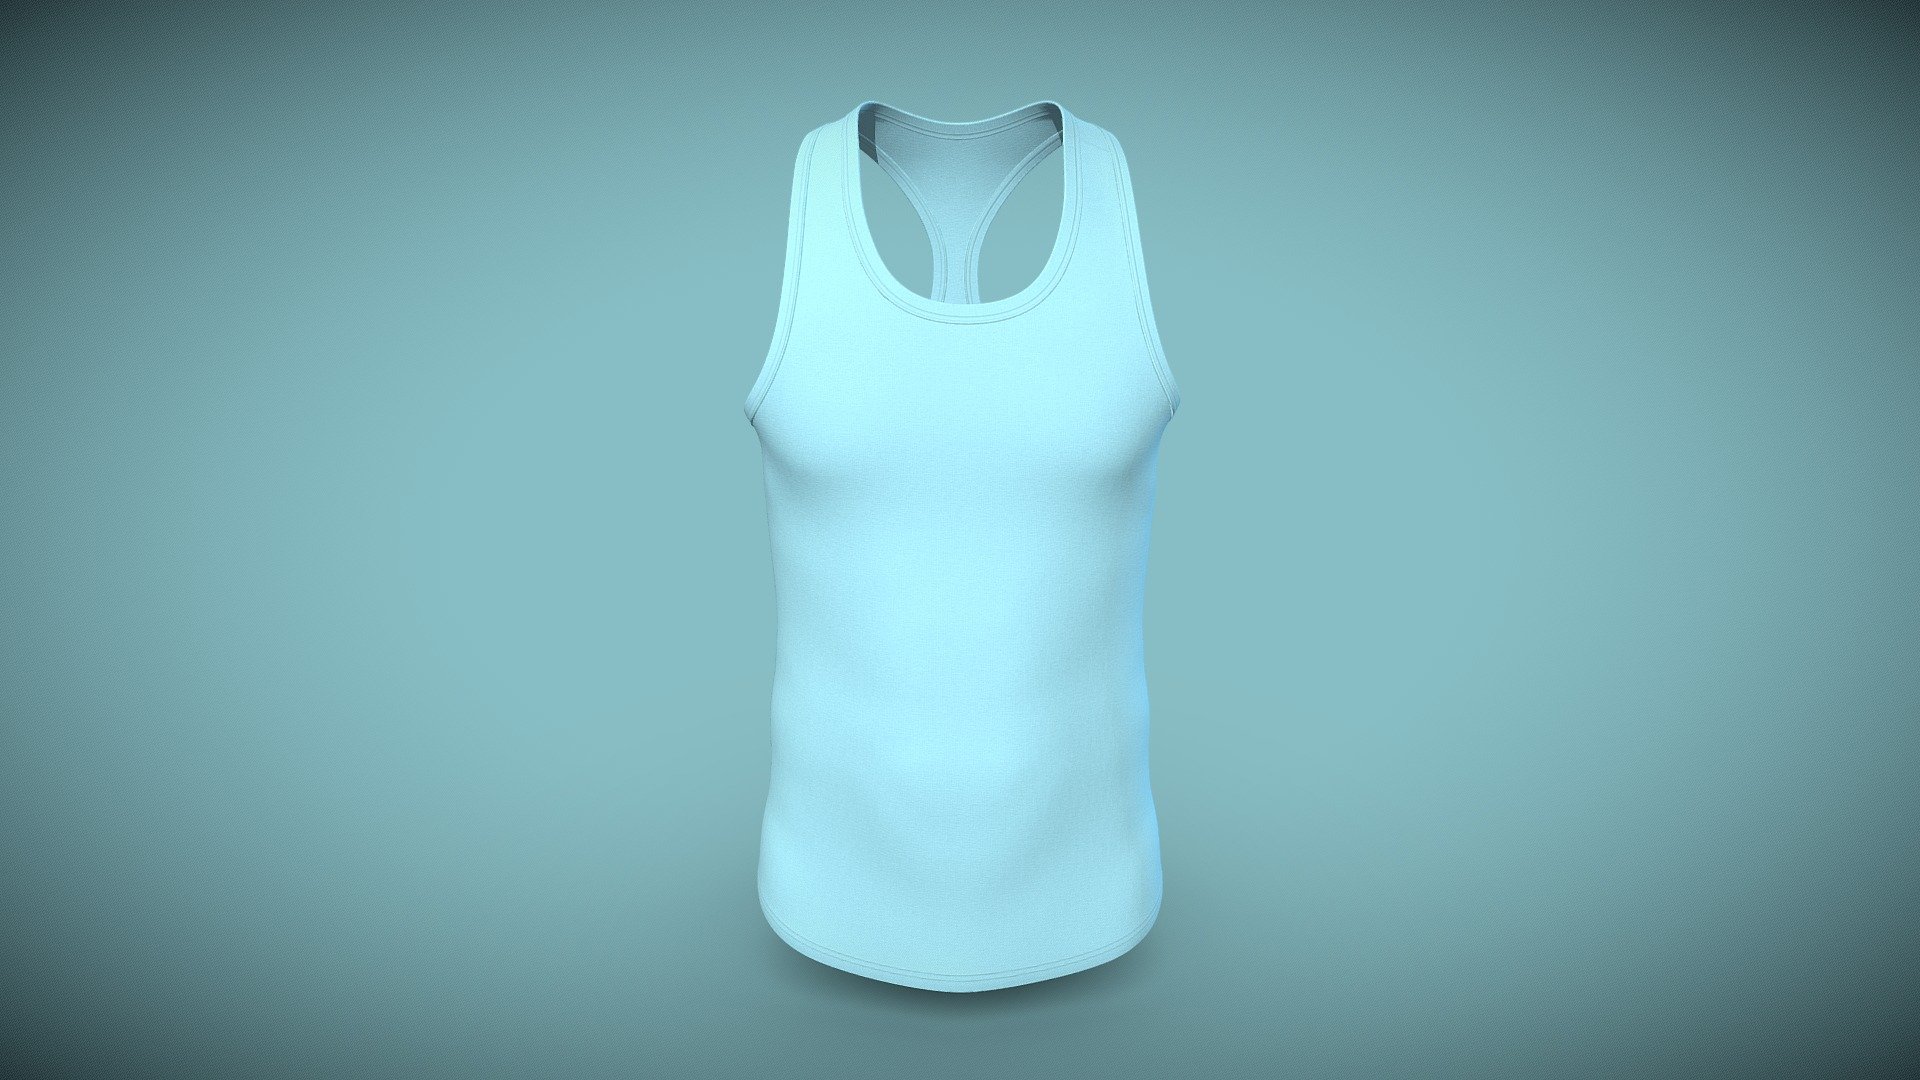 Cloth Title = Basic Tanktops Clothing 

SKU = DG100208 

Category = Unisex 

Product Type = Tank Top 

Cloth Length = Regular 

Body Fit = Fitted
  
Occasion = Sportswear 
 

Our Services:

3D Apparel Design.

OBJ,FBX,GLTF Making with High/Low Poly.

Fabric Digitalization.

Mockup making.

3D Teck Pack.

Pattern Making.

2D Illustration.

Cloth Animation and 360 Spin Video.


Contact us:- 

Email: info@digitalfashionwear.com 

Website: https://digitalfashionwear.com 


We designed all the types of cloth specially focused on product visualization, e-commerce, fitting, and production. 

We will design: 

T-shirts 

Polo shirts 

Hoodies 

Sweatshirt 

Jackets 

Shirts 

TankTops 

Trousers 

Bras 

Underwear 

Blazer 

Aprons 

Leggings 

and All Fashion items. 





Our goal is to make sure what we provide you, meets your demand 3d model